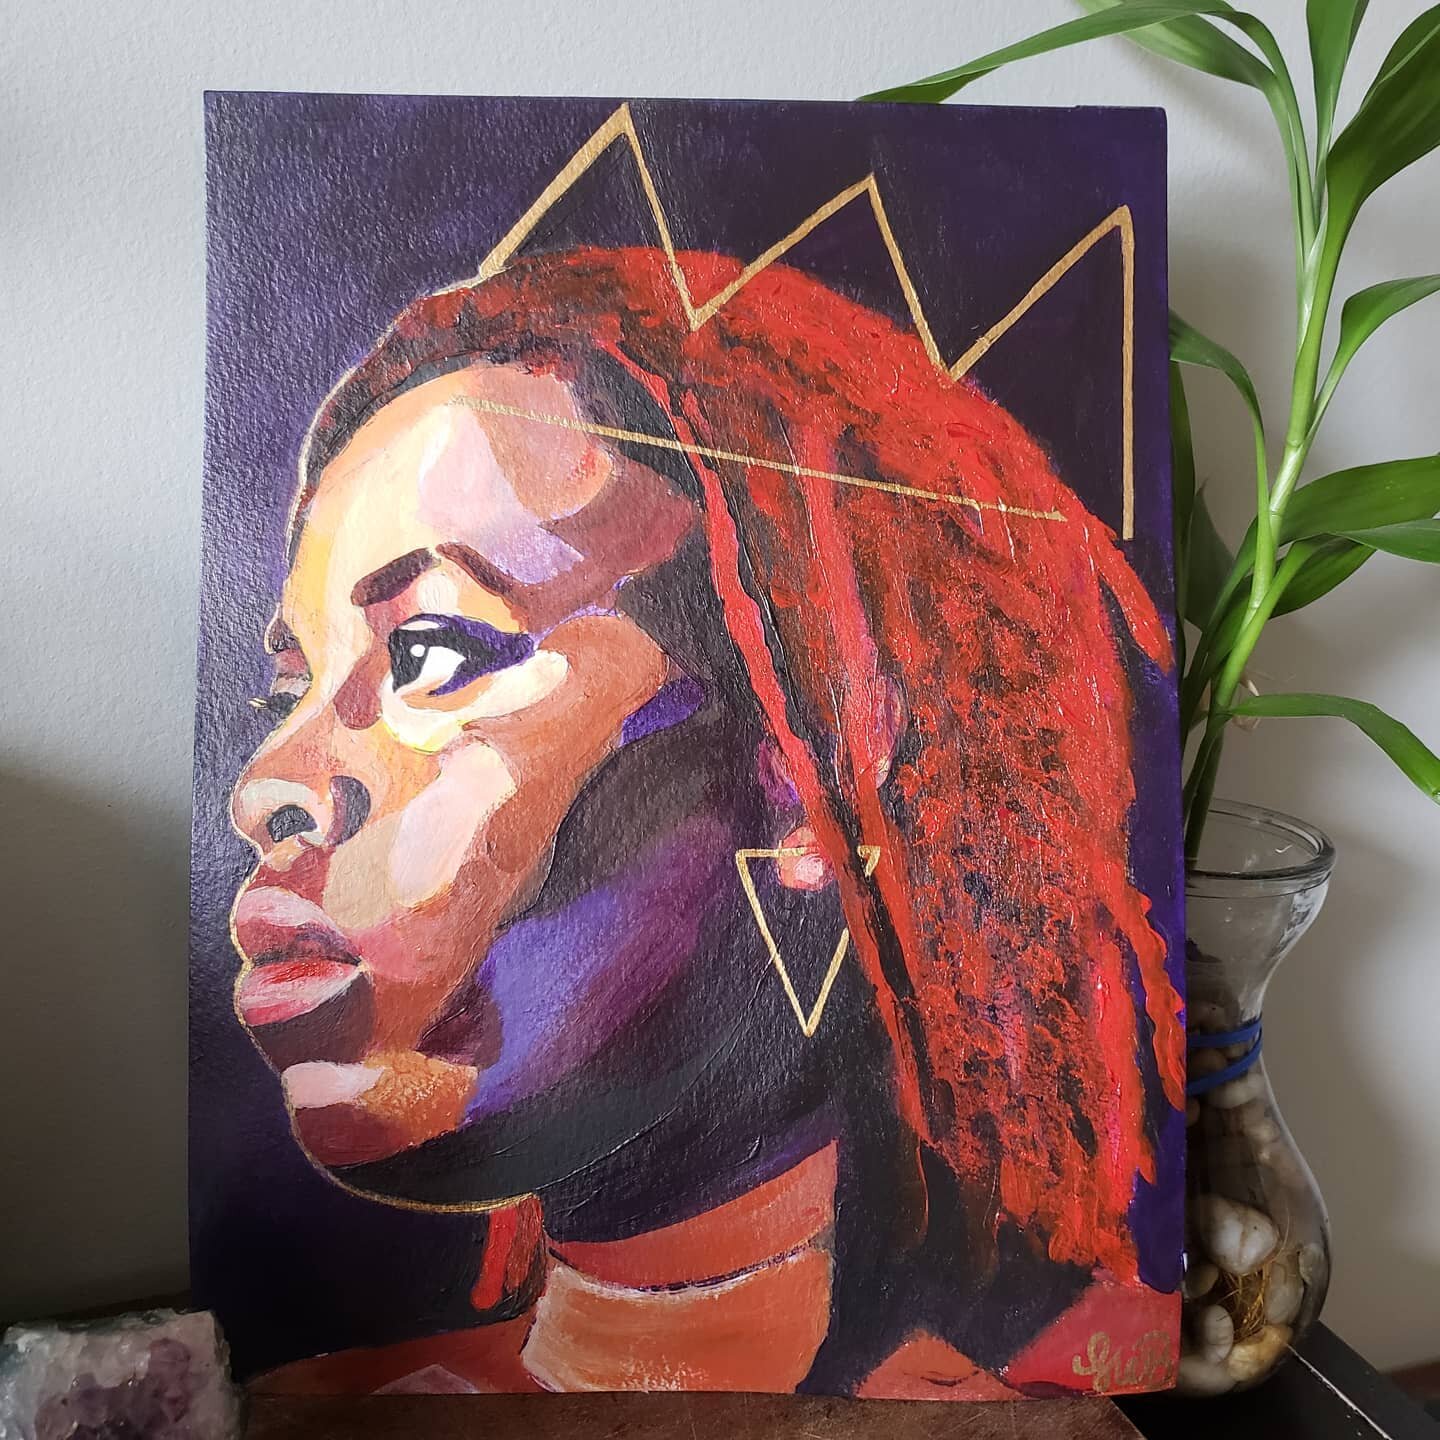 I love doing portraits of women to inspire them to feel beautiful and powerful. 
You are all one of a kind masterpieces🌹
.
.
Model: @lenahkama
#portraitpainting #acrylic #ottawaart #ottawa